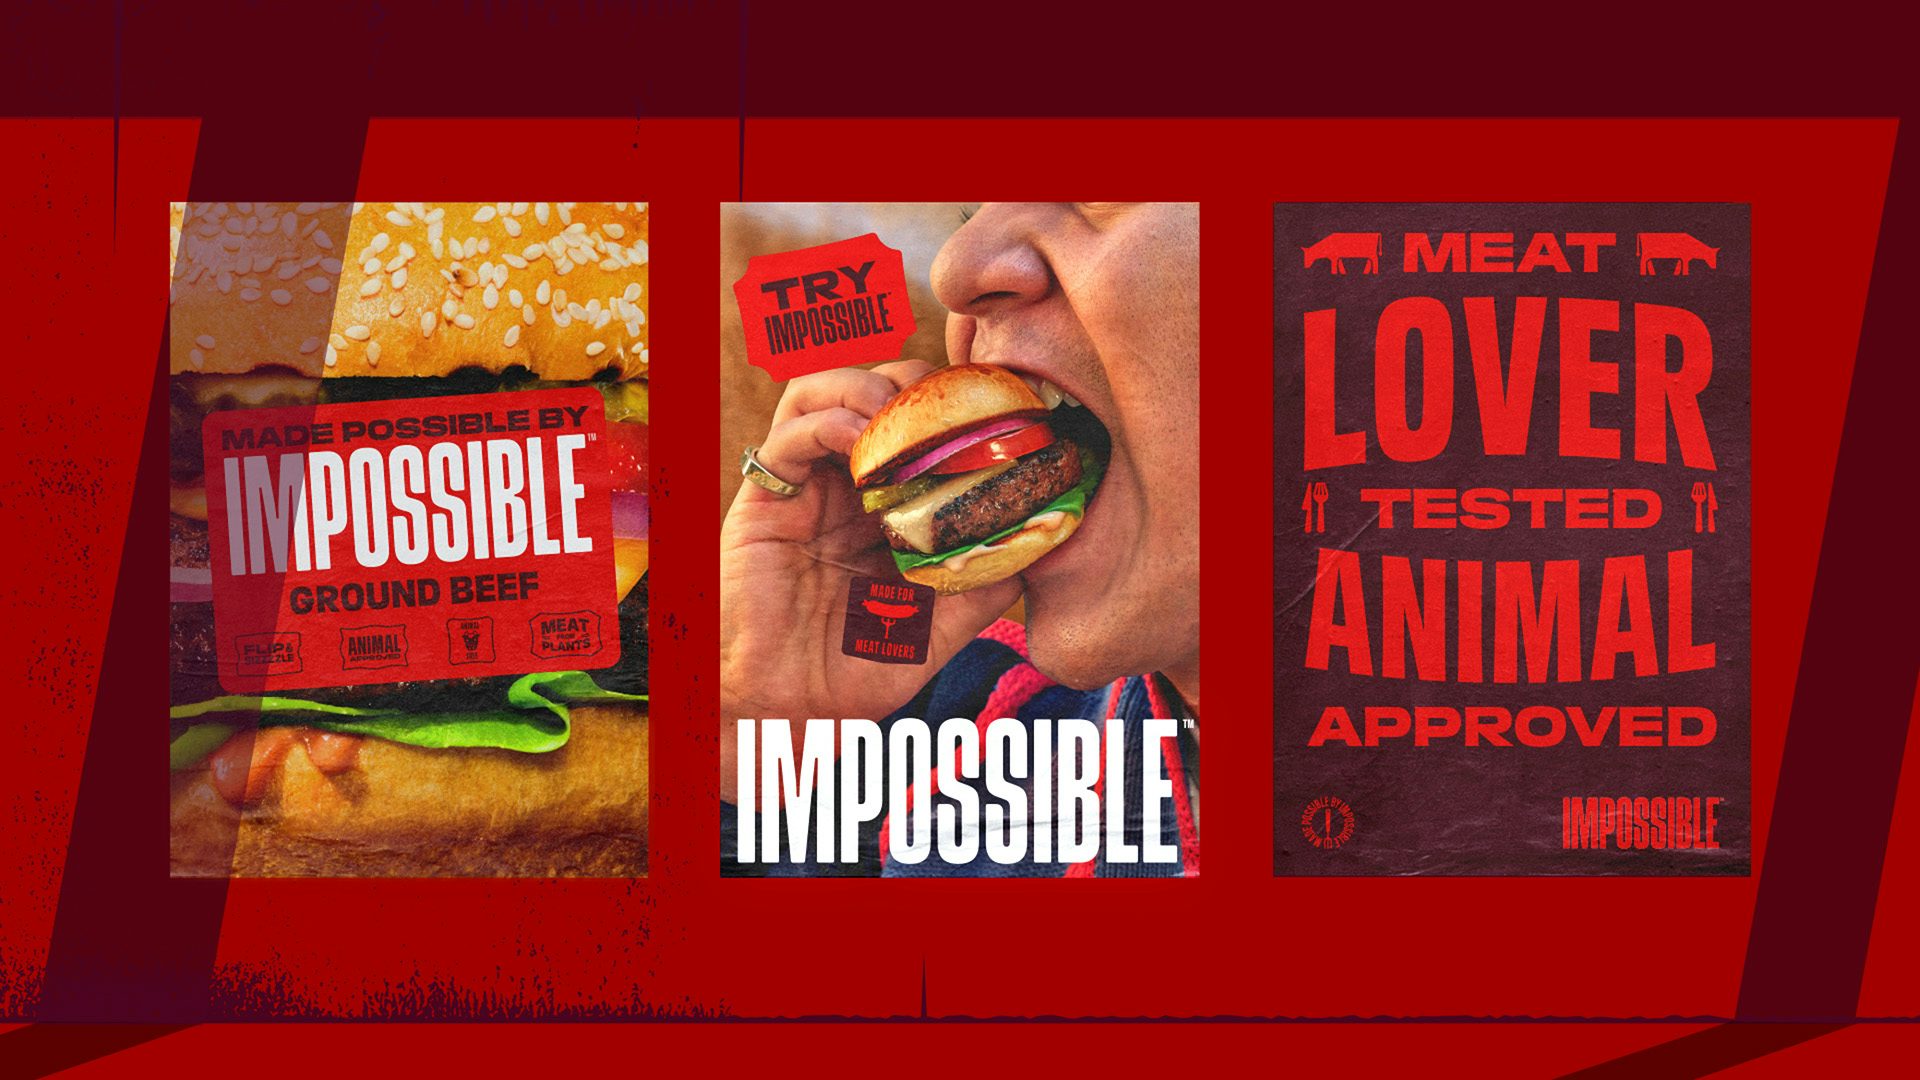 Image shows a row of three vertical posters, two featuring photos of Impossible burgers and the last one headlined 'Meat lover tested Animal approved'